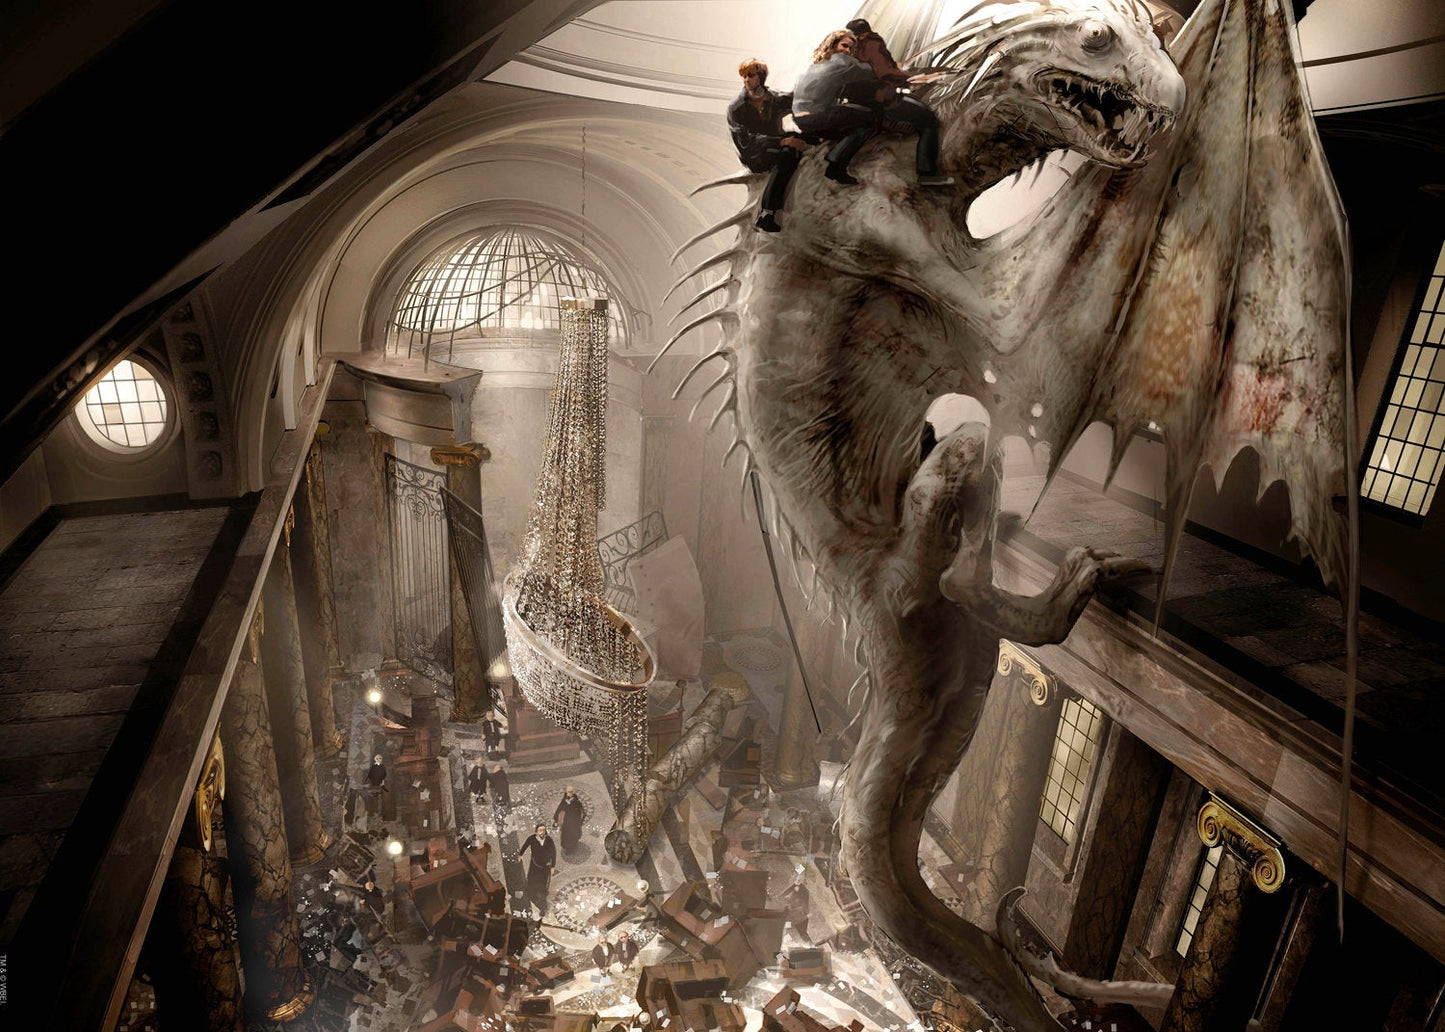 Harry Potter Escape on the Dragon Stuart Craig SIGNED Warners Giclee on Paper Limited Ed of 500